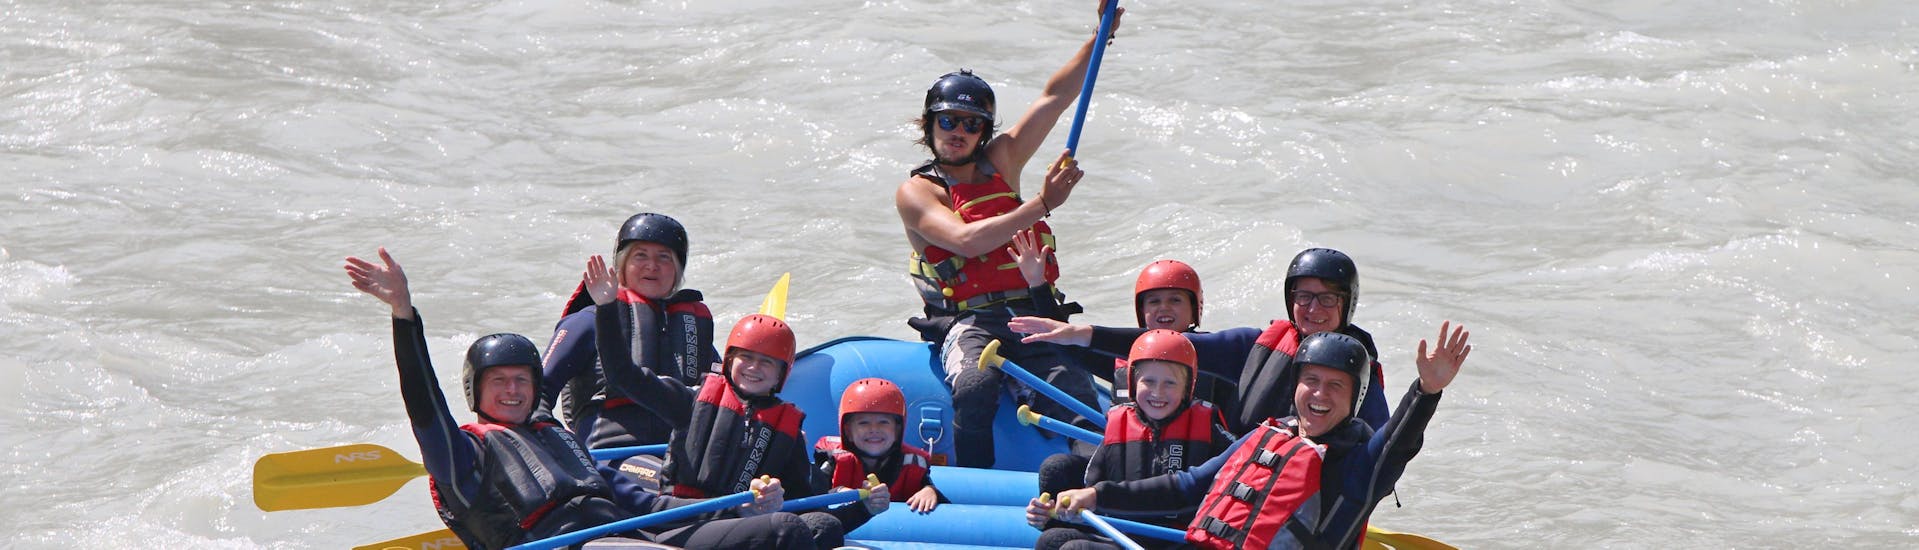 A boat full of happy people while Rafting for Families on the Inn River - Pirate Tour with H2O Adventure Ried.